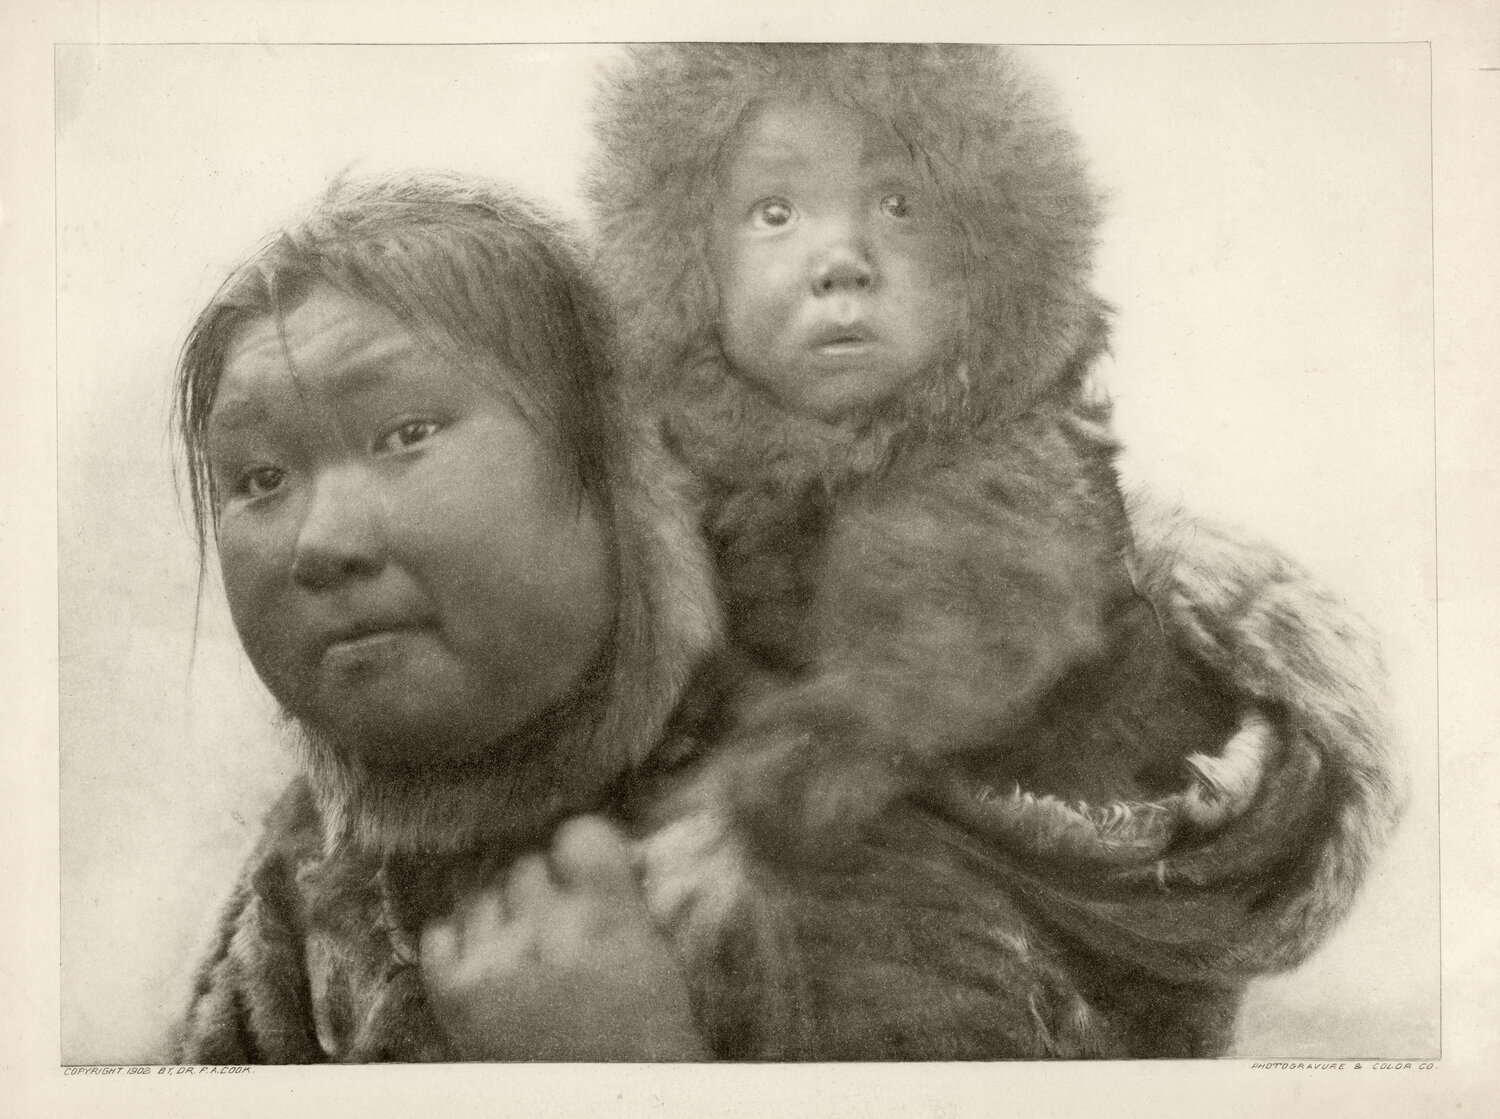 "Eskimo Madonna and Child" by Frederick Cook